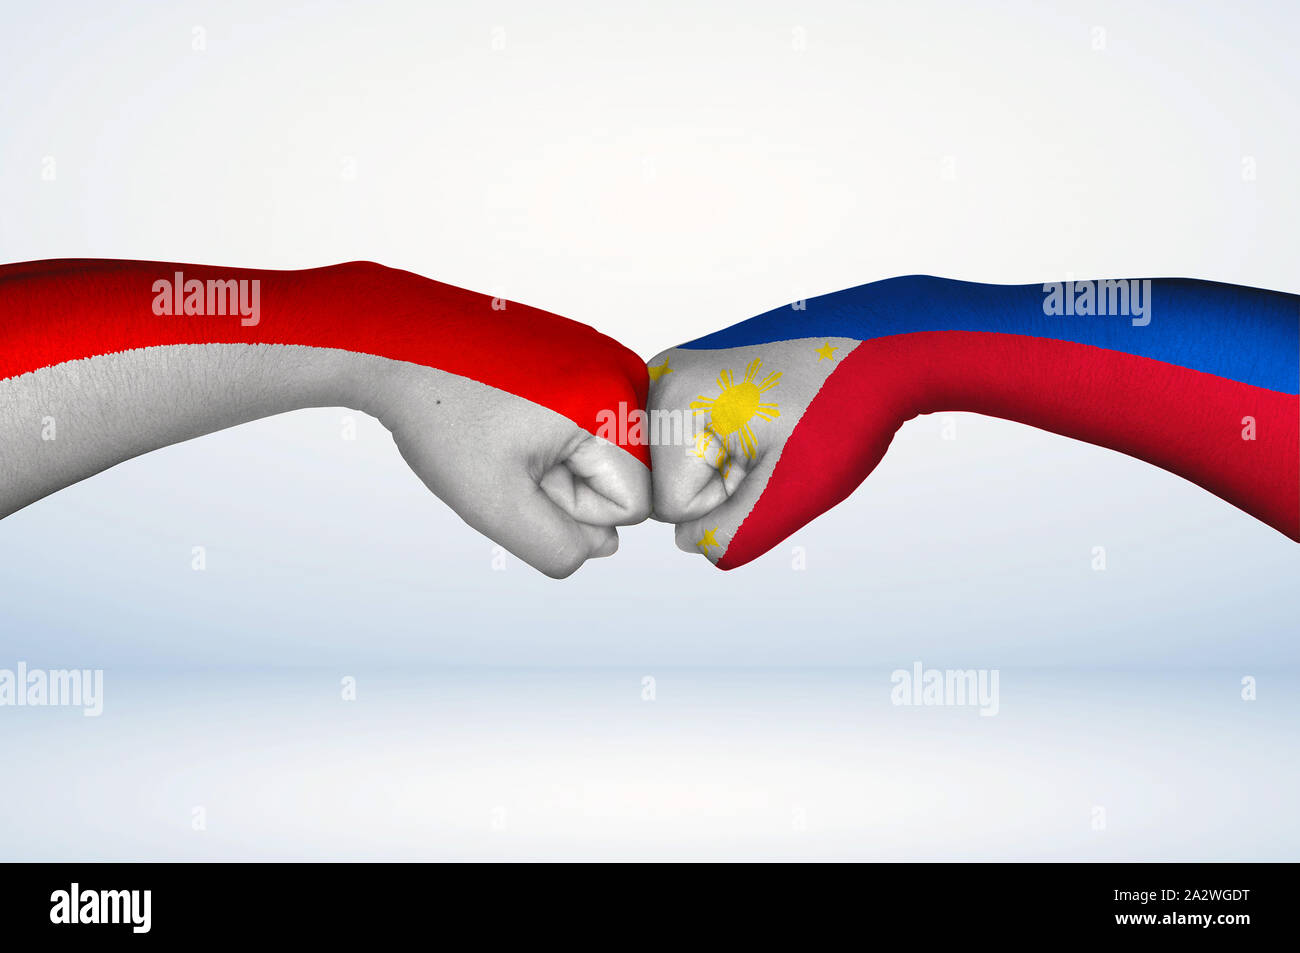 Fist bump of Filipino and Indonesian flags. Two hands with painted flags of Philippines and Indonesia Flag fist bumping as a symbol of unity. Stock Photo